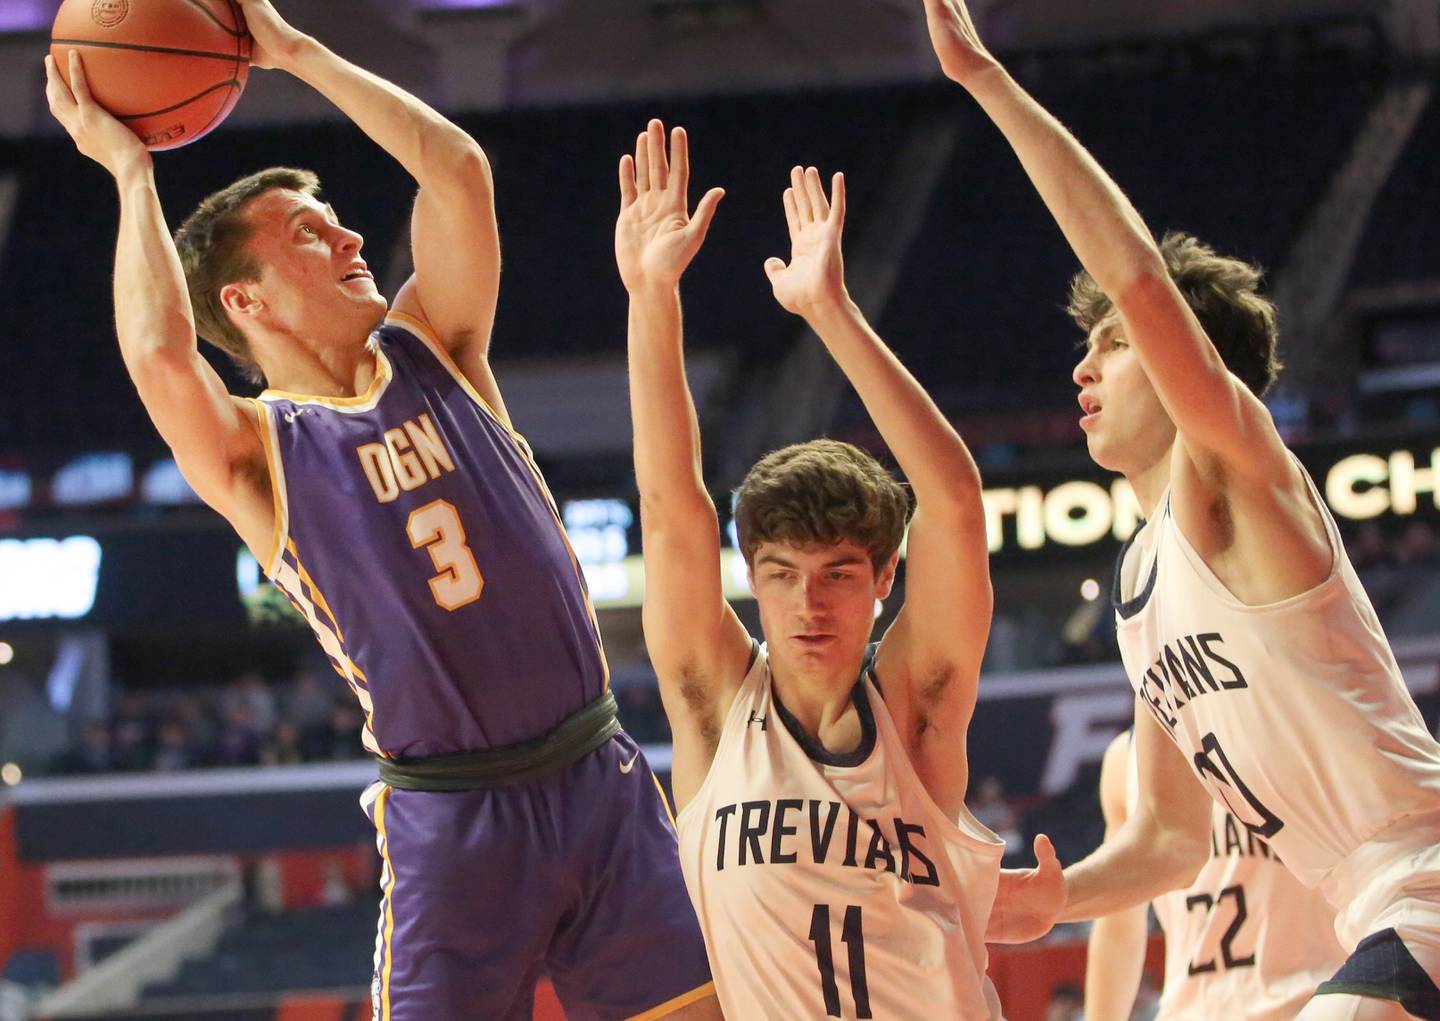 Downers Grove North's Ethan Thulin looks to shoot over New Trier's Evan Kanellos and Tyler Van Gorp in the Class 4A state third place game on Friday, March 10, 2023 at the State Farm Center in Champaign.